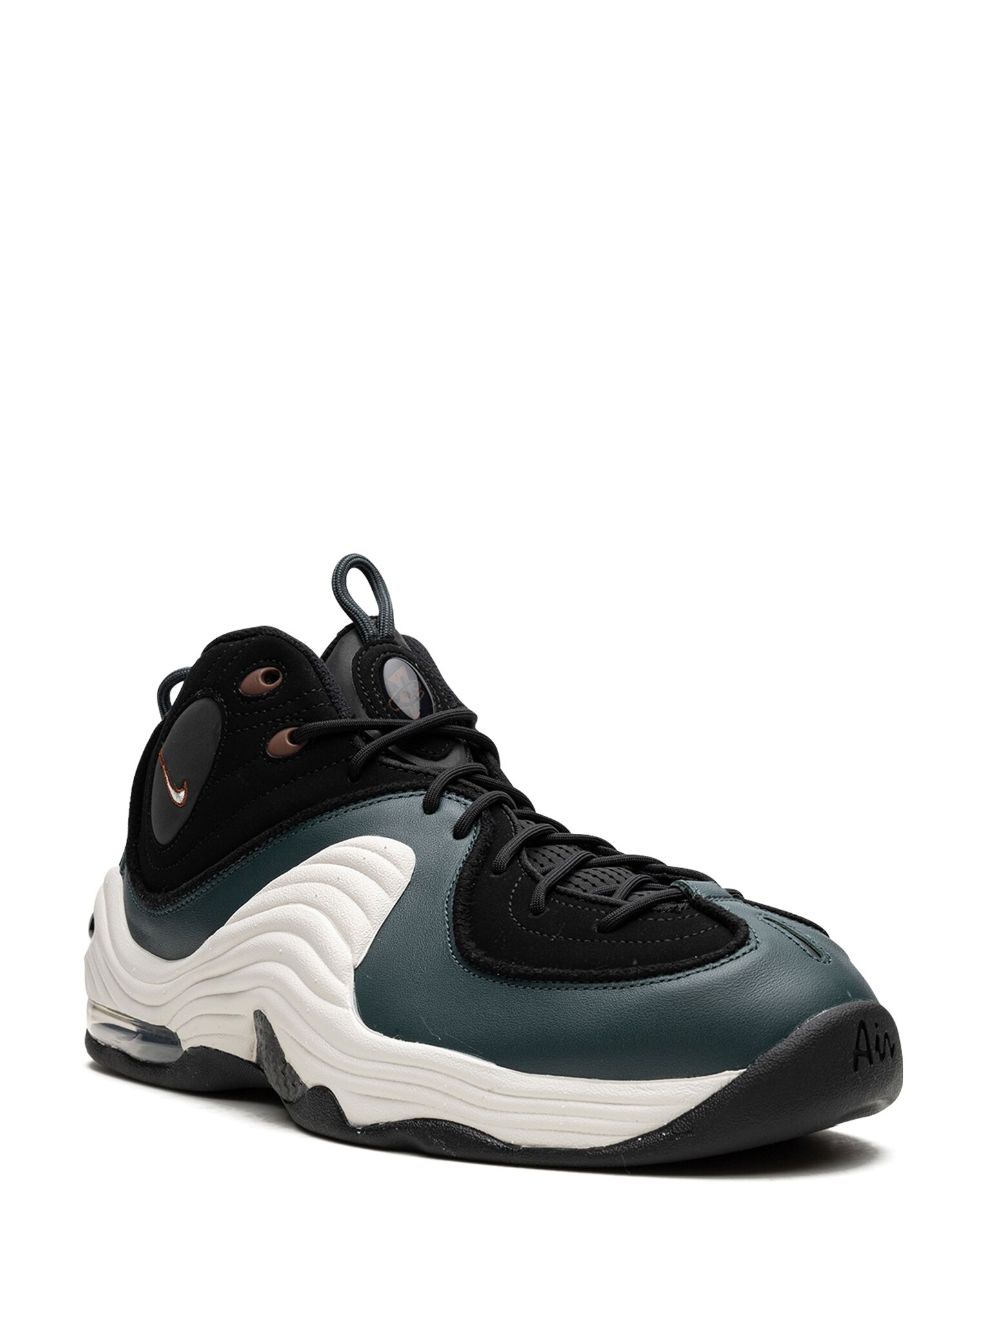 Image 2 of Nike "Air Penny 2 ""Faded Spruce"" sneakers"